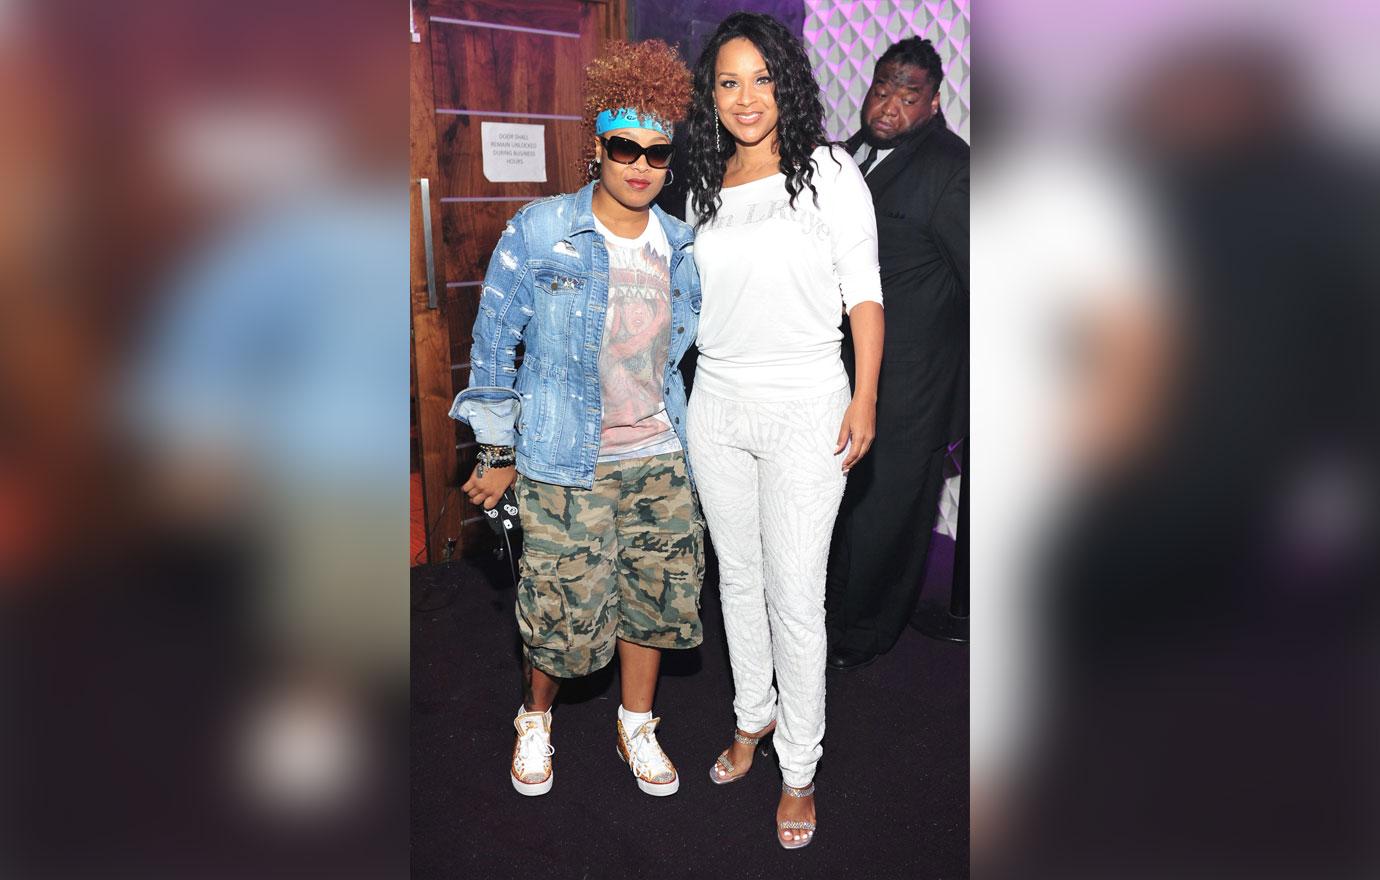 Why Do Rapper Da Brat and Her Sister LisaRaye McCoy Have Beef?